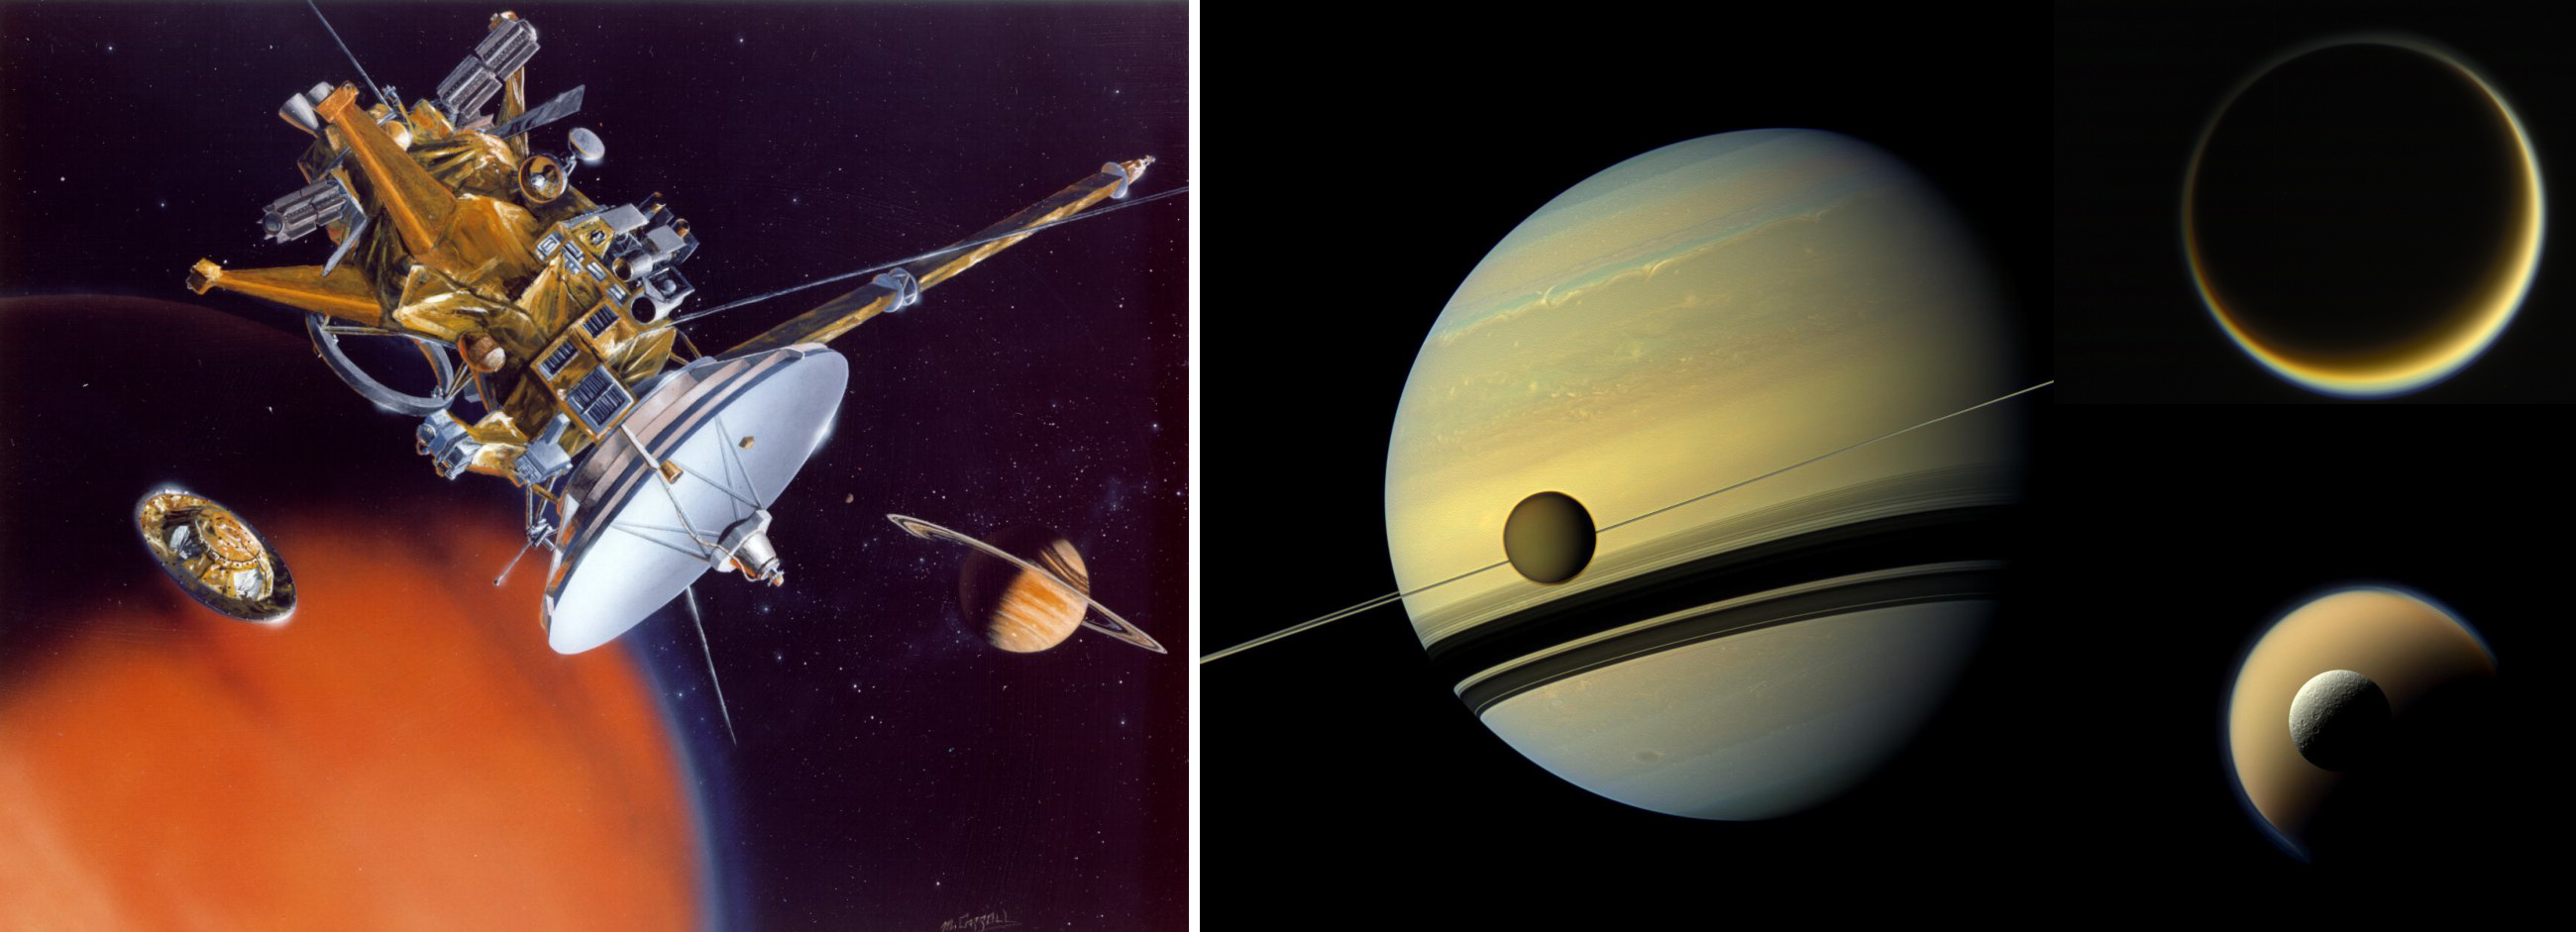 Cassini and Titan side by side